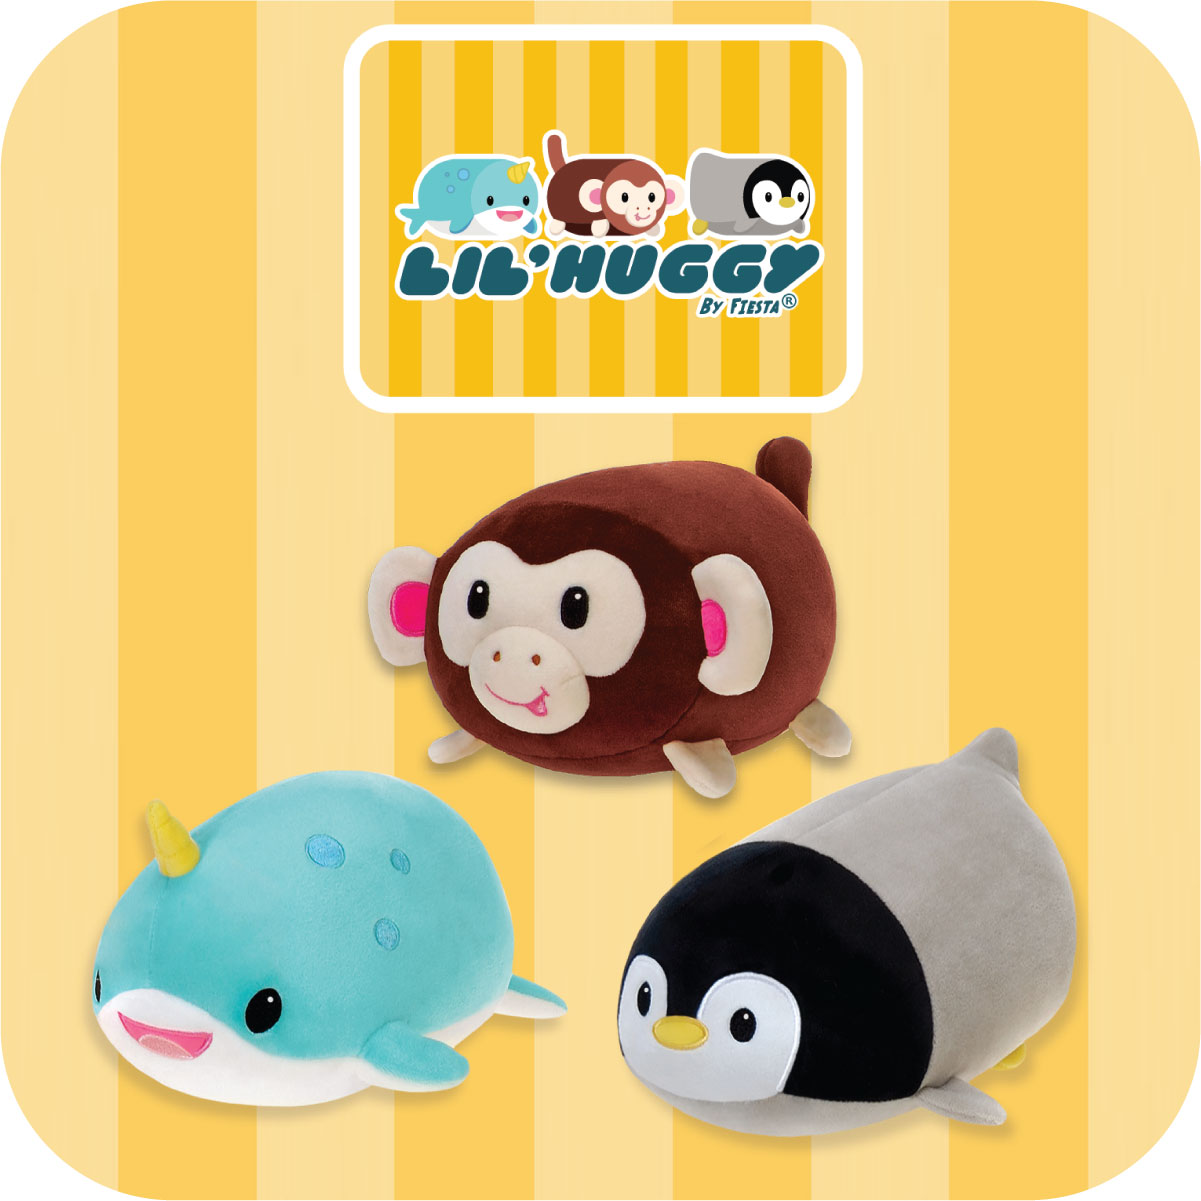 Be careful with our Shifty Eyes plush! - Fiesta Plush Toys